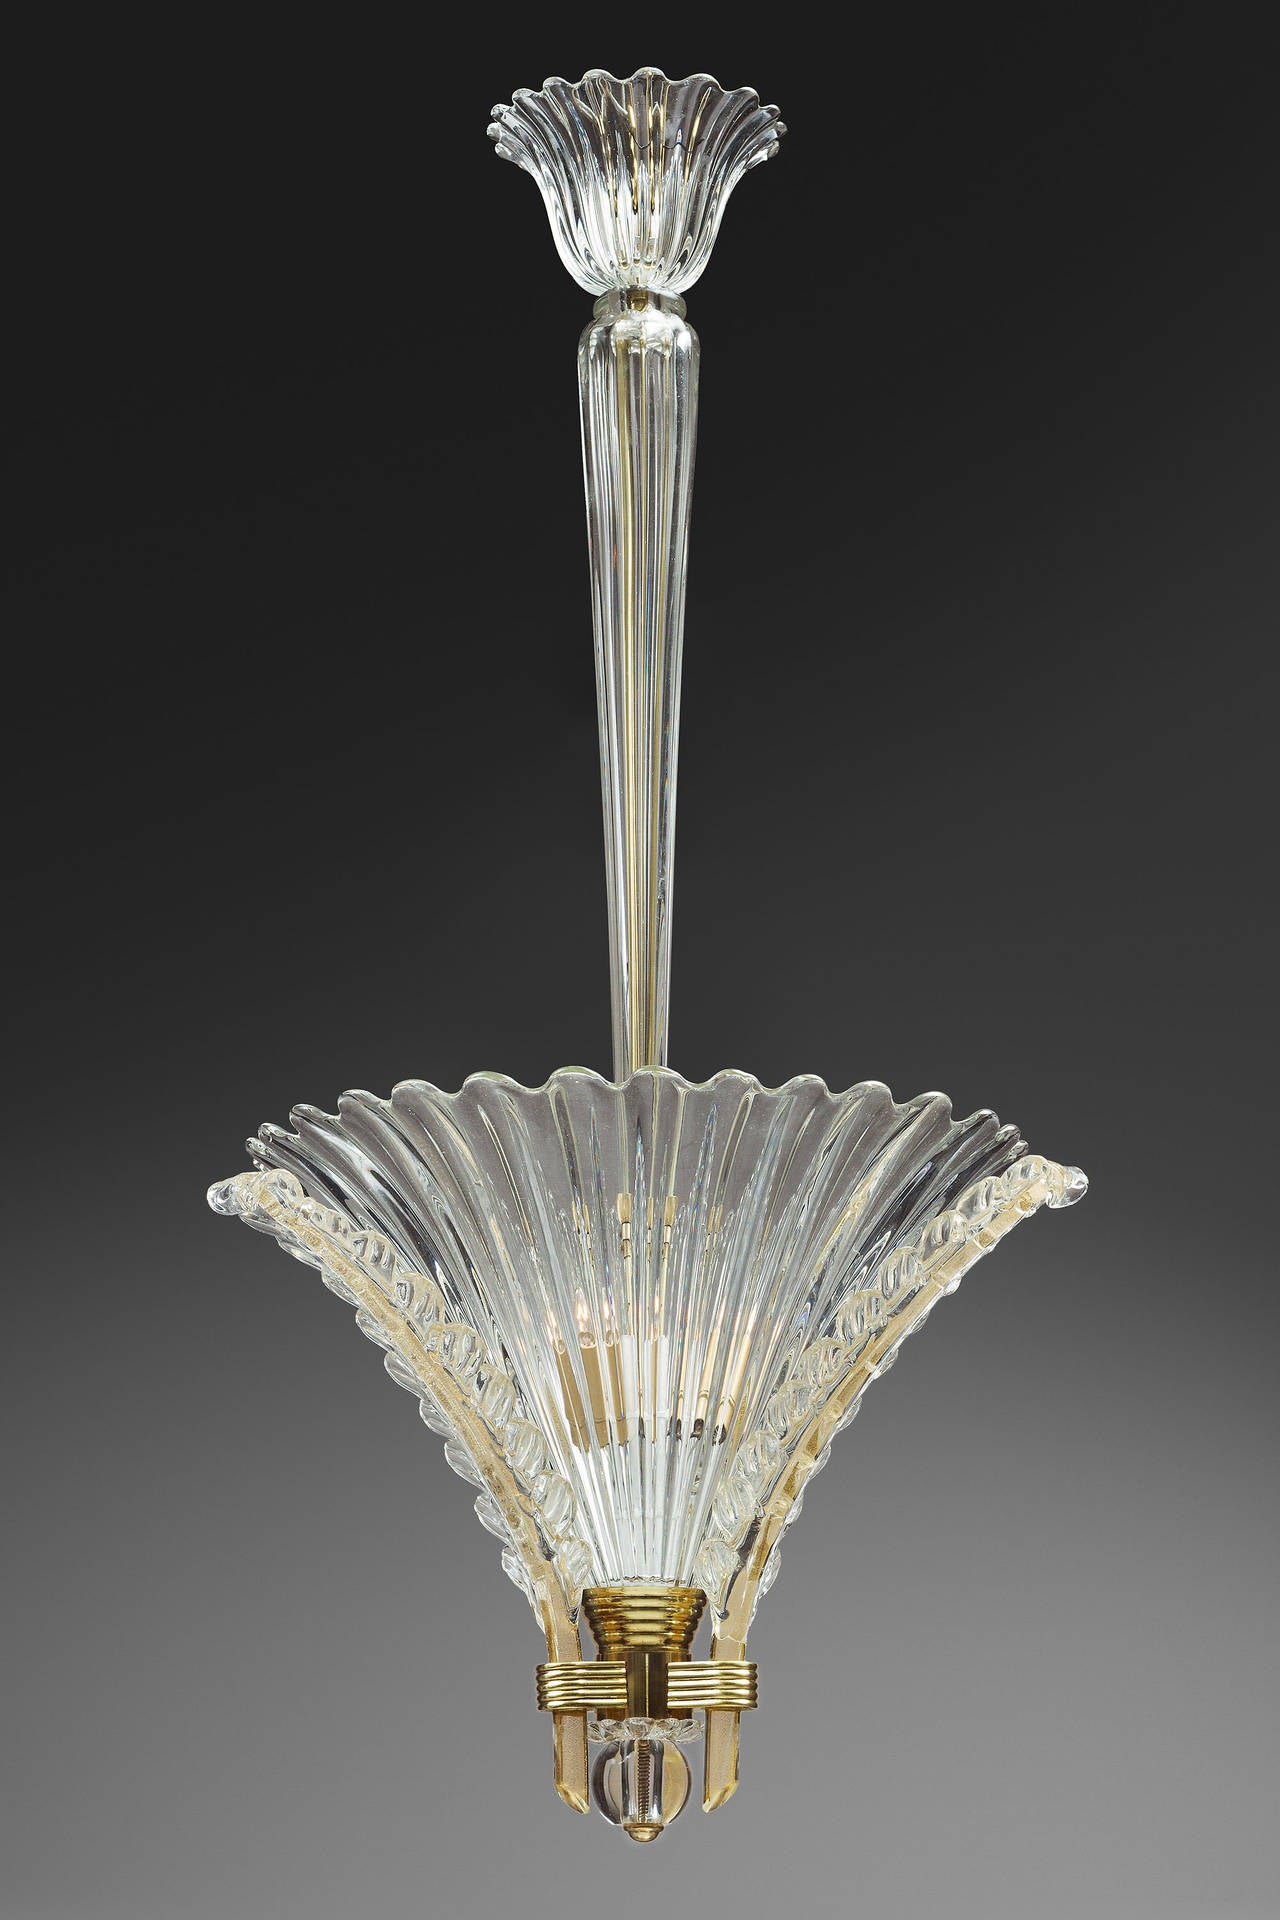 Small chandelier from Barovier & Toso
Italy circa 1950
Strucutre in gilt bronze
Model with a Murano glass central cup and 3 leaves
3 lights in the cup